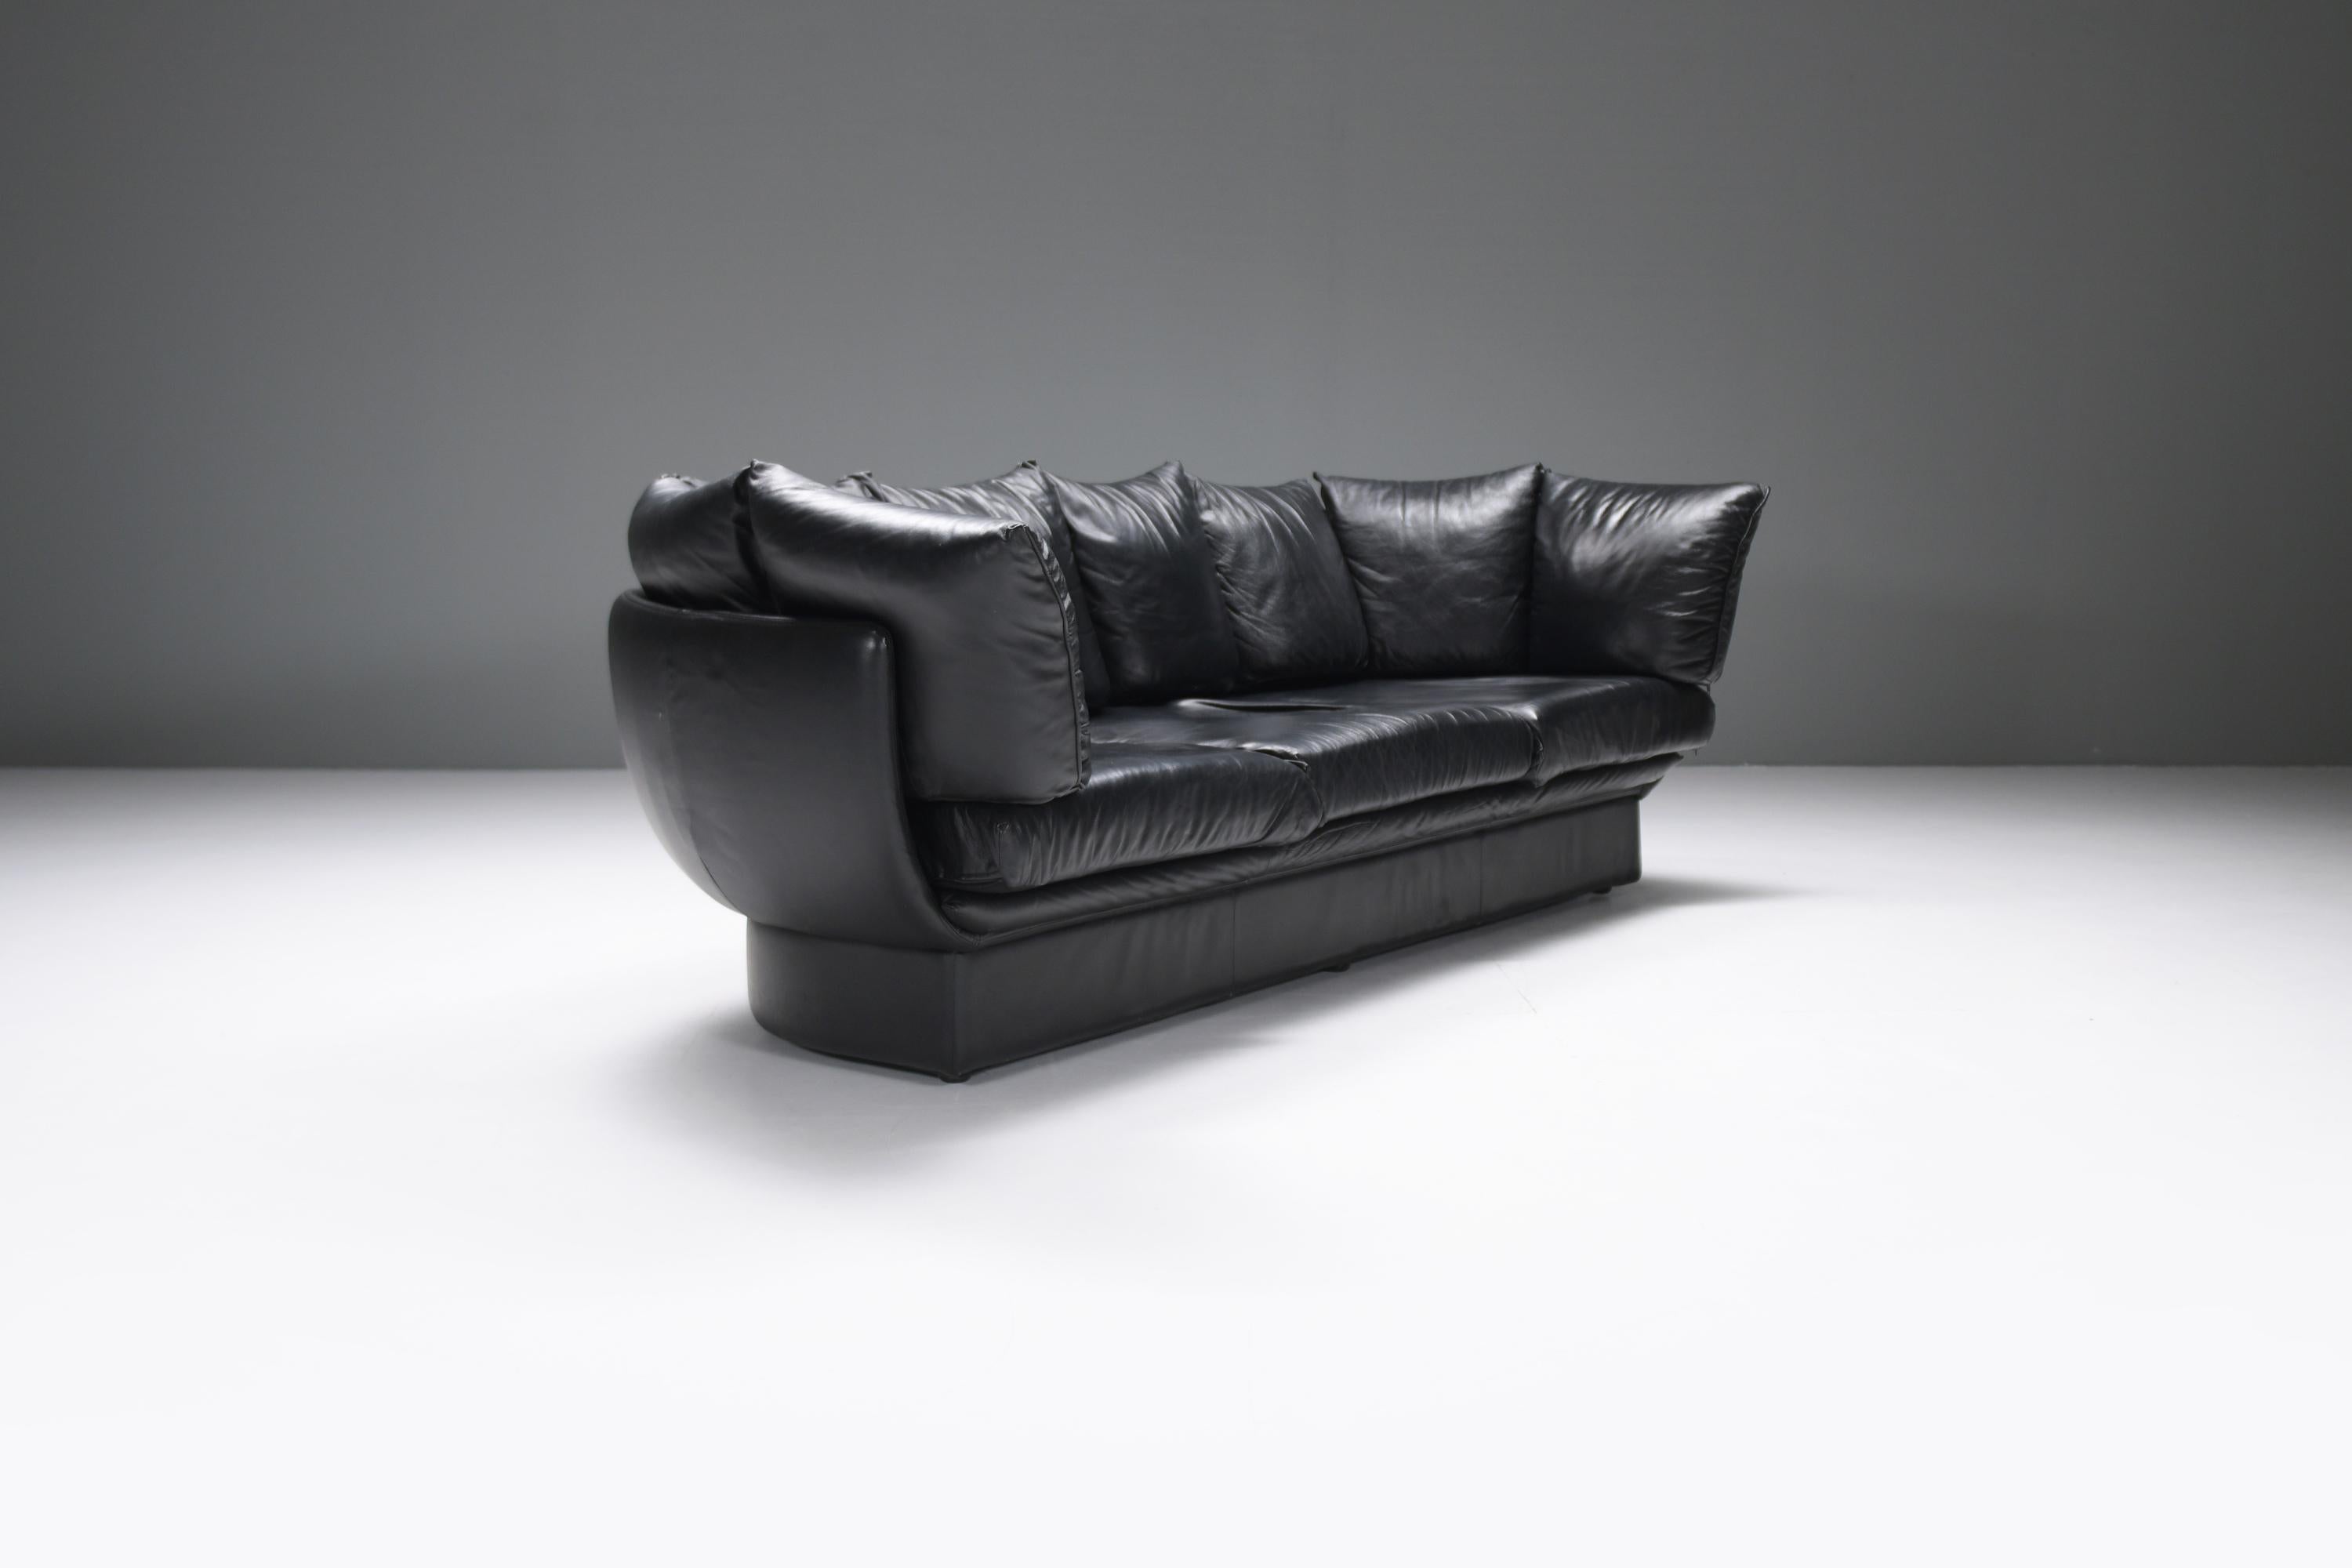 
Extremely rare, stylish and elegant ‘Champagne’ sofa in its original vintage black leather.
Designed & produced by LEV & LEV in Italy in the 90s.

This beauty is a rare find on the second hand market.  
Its sensual shapes make it a real eye-catcher